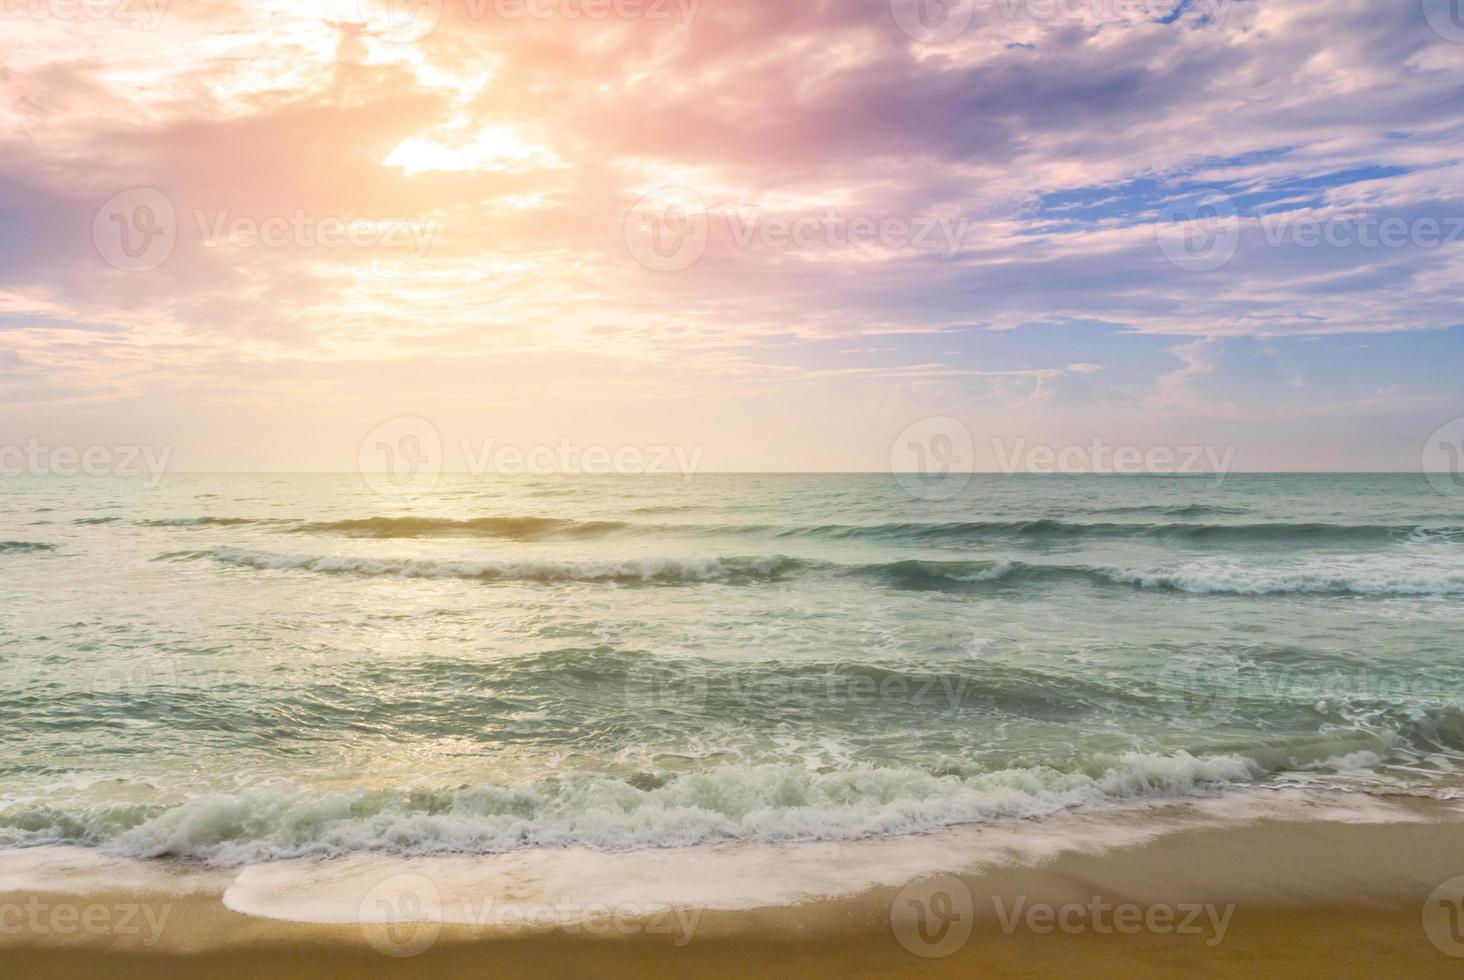 Landscape of tropical beach nature and clouds on horizon in Thailand. Summer relax outdoor concept. photo